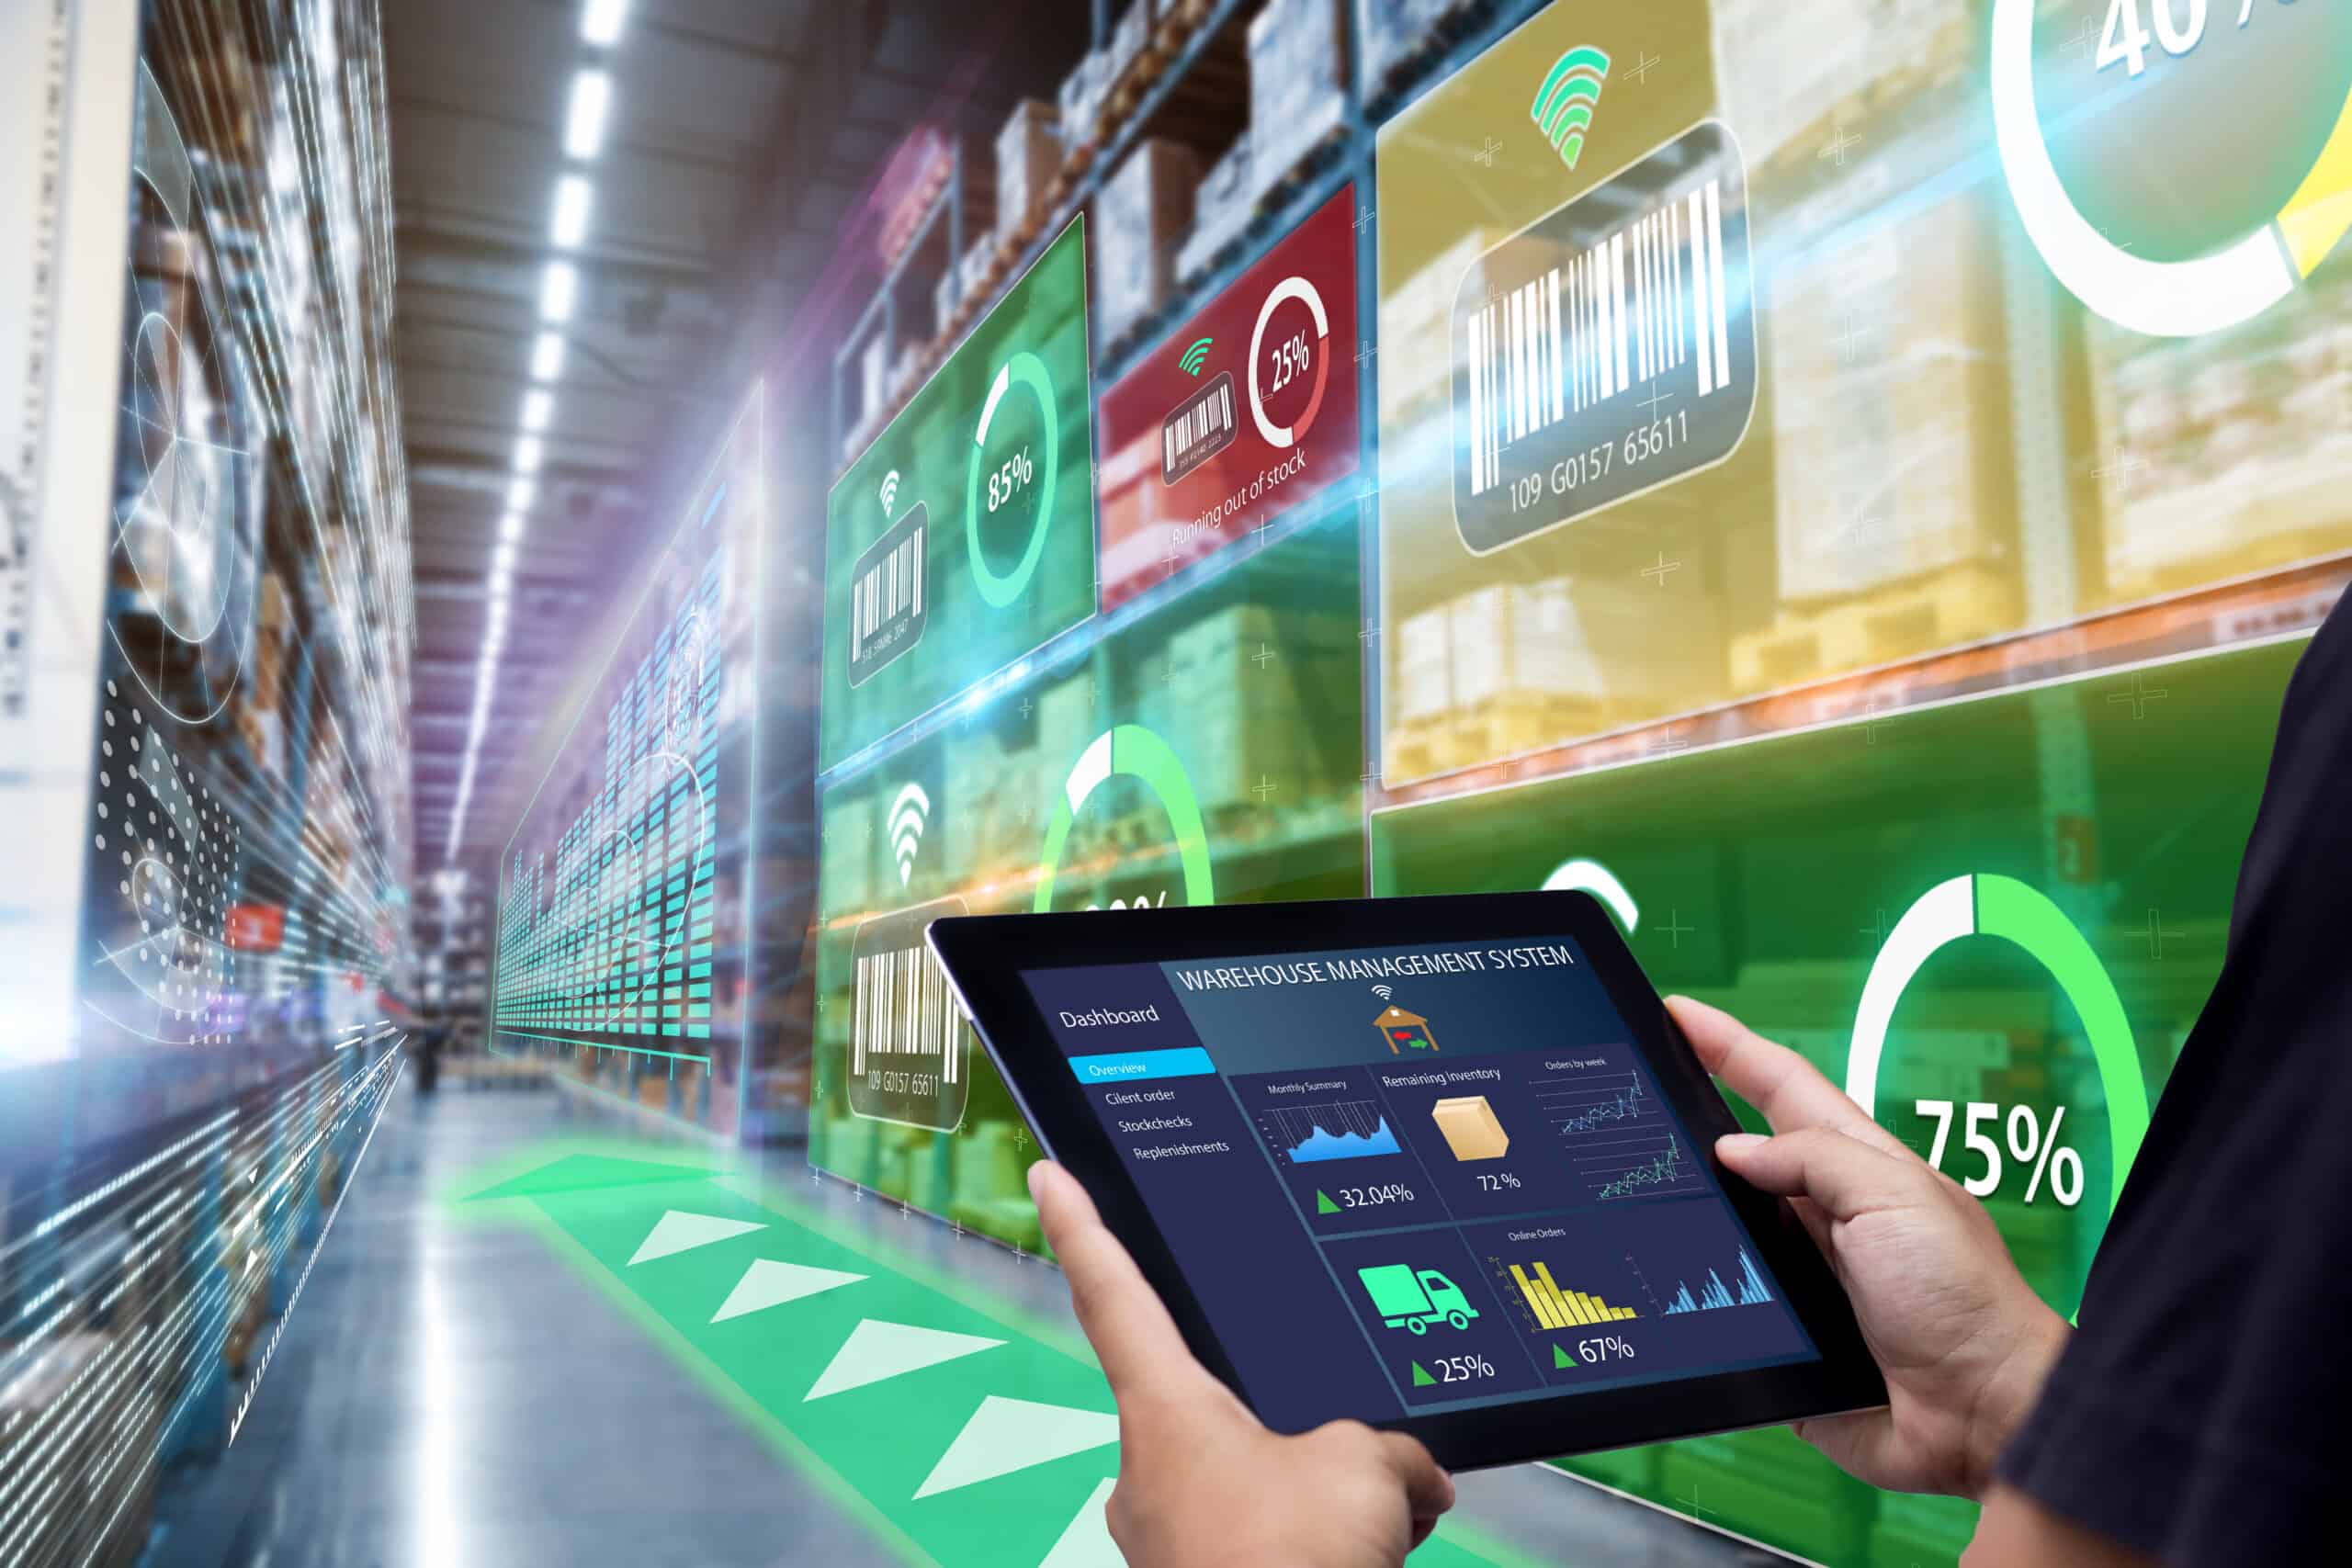 Supply chain innovation takes centre stage as internet retailers maximise profitability